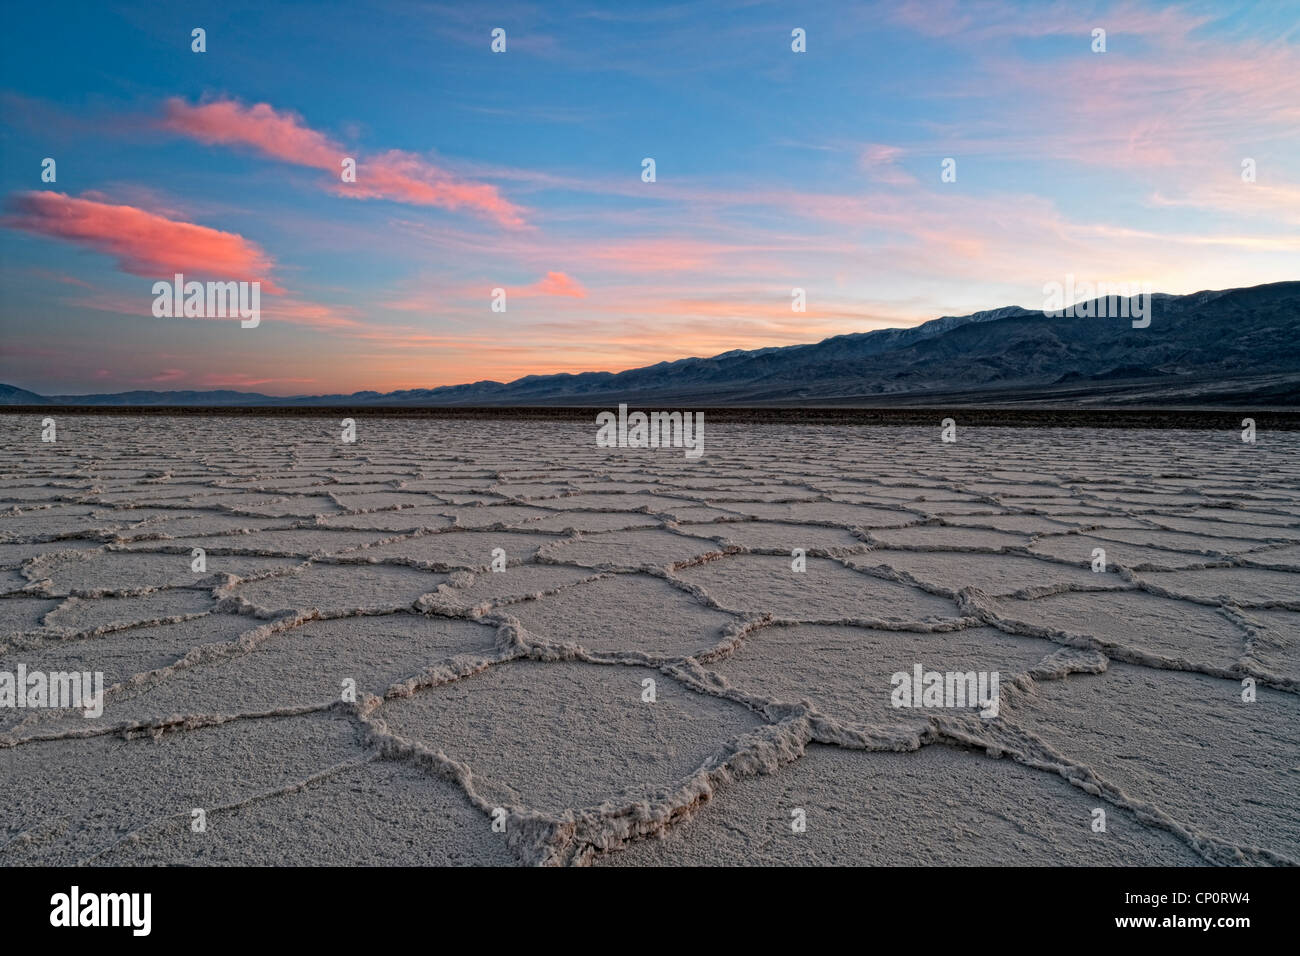 Winter sunset over the Panamint Range and the salt polygons of Badwater Basin in California's Death Valley National Park. Stock Photo